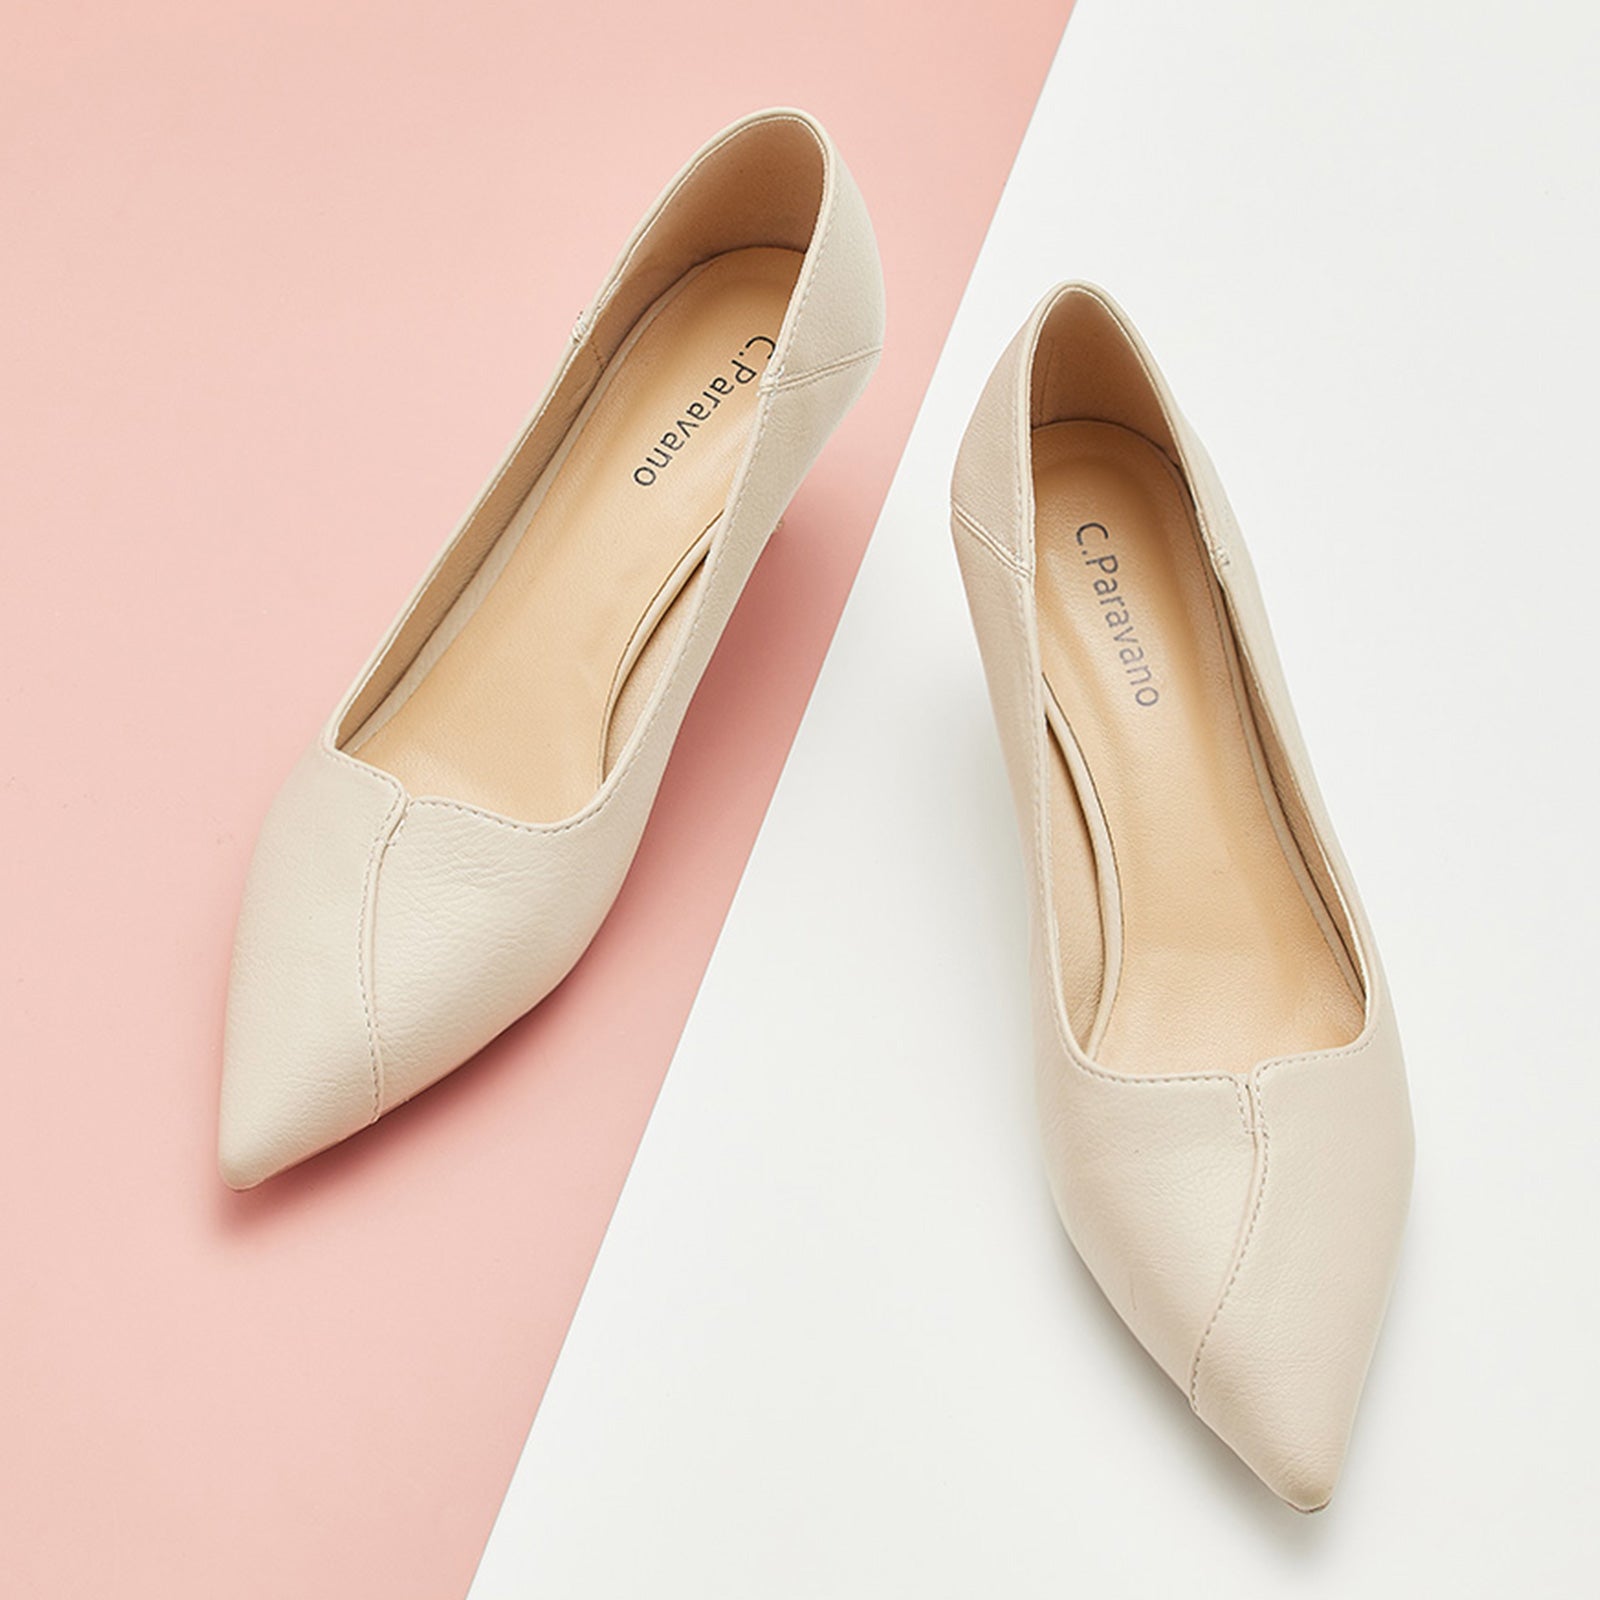 White Kitten Heel Pumps with a convertible design, a chic and modern choice for everyday wear